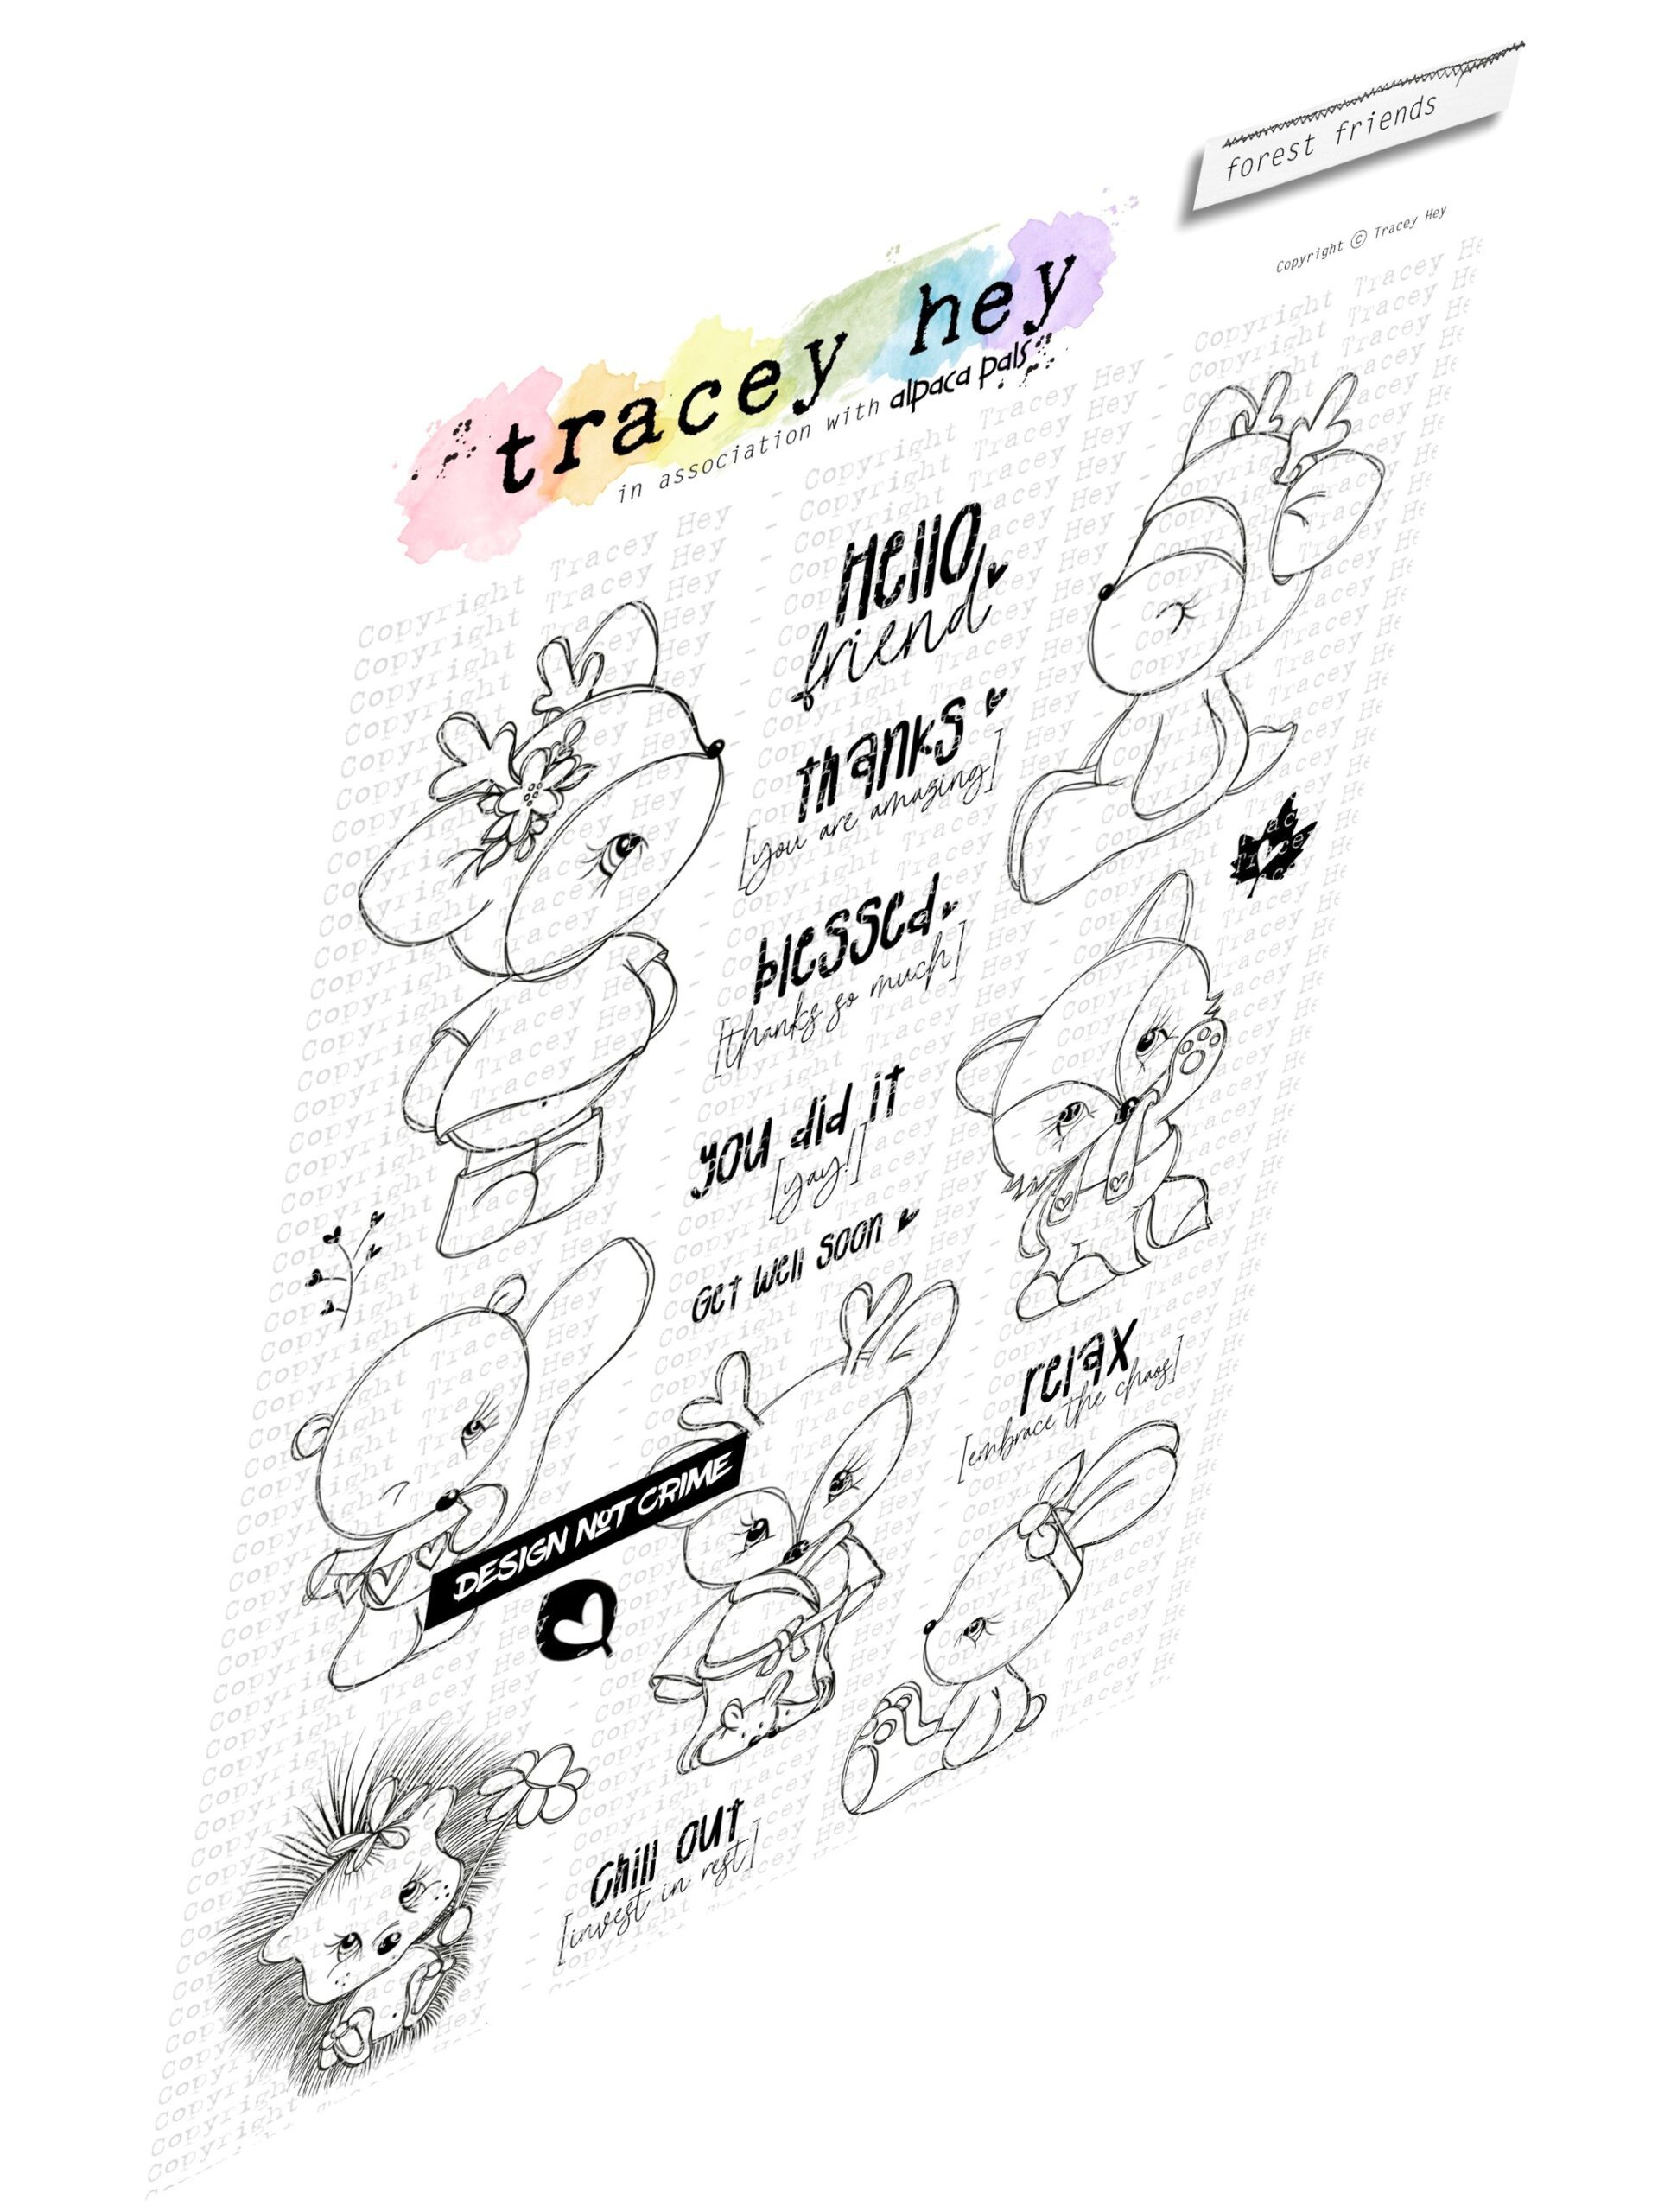 Forest Friends stamp set, Tracey Hey